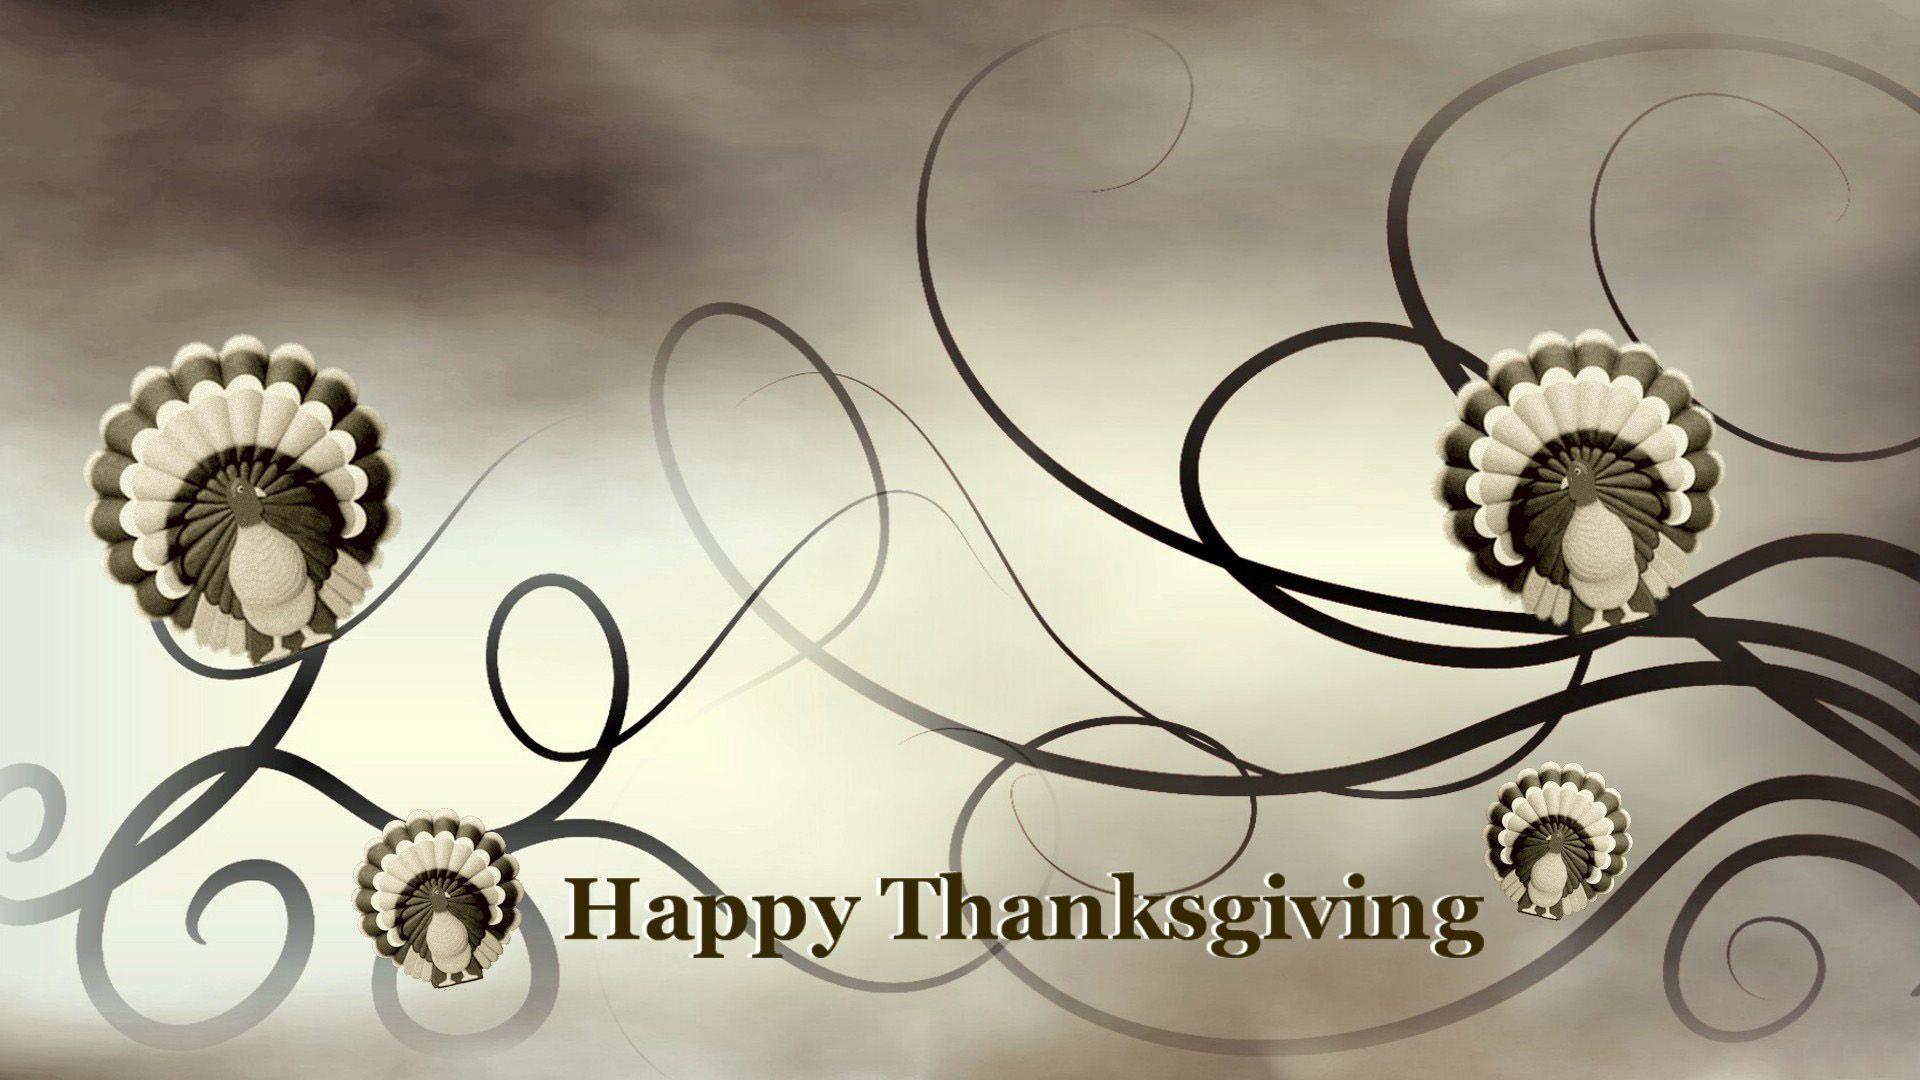 Cute Thanksgiving Desktop Wallpapers Image & Pictures